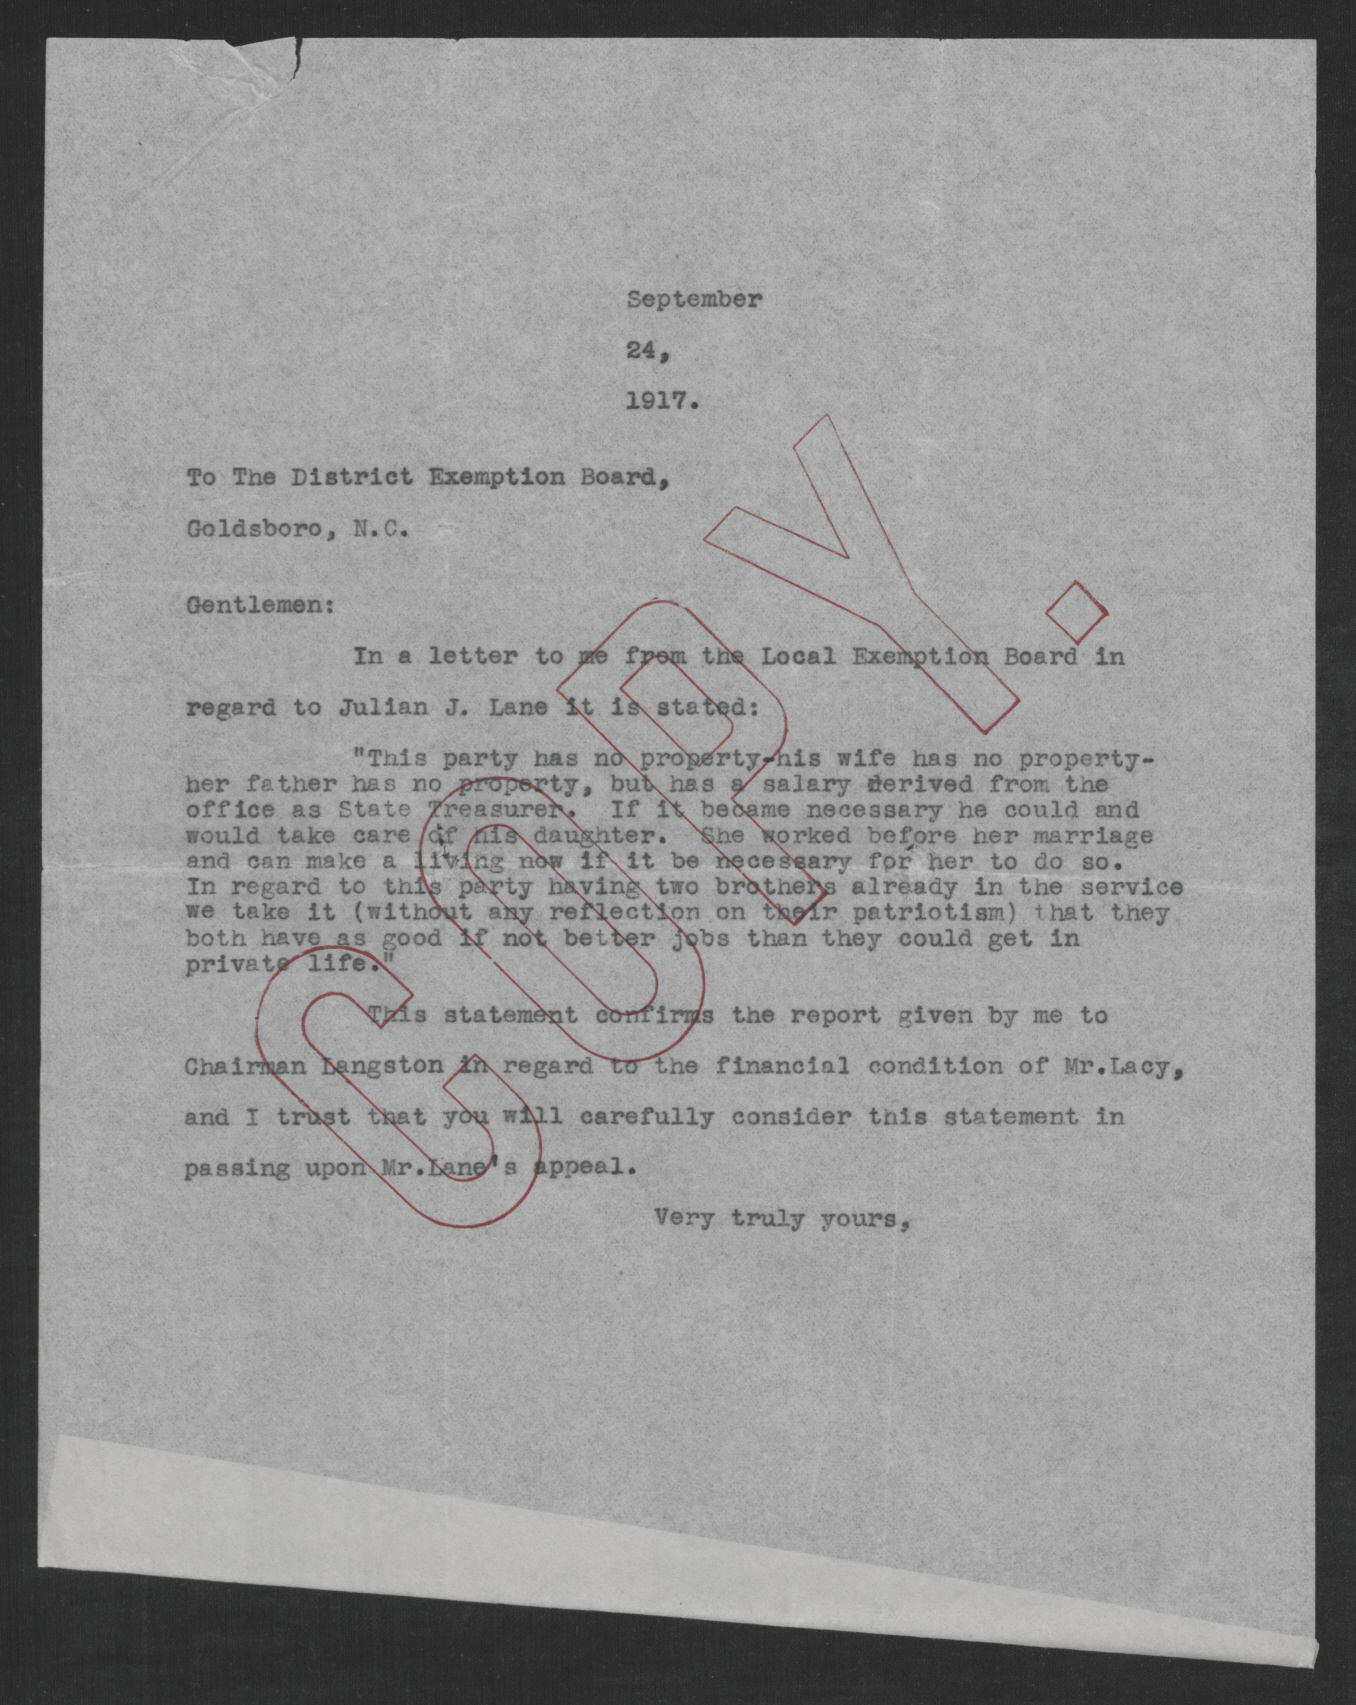 Letter from Unknown to the District Exemption Board, September 24, 1917